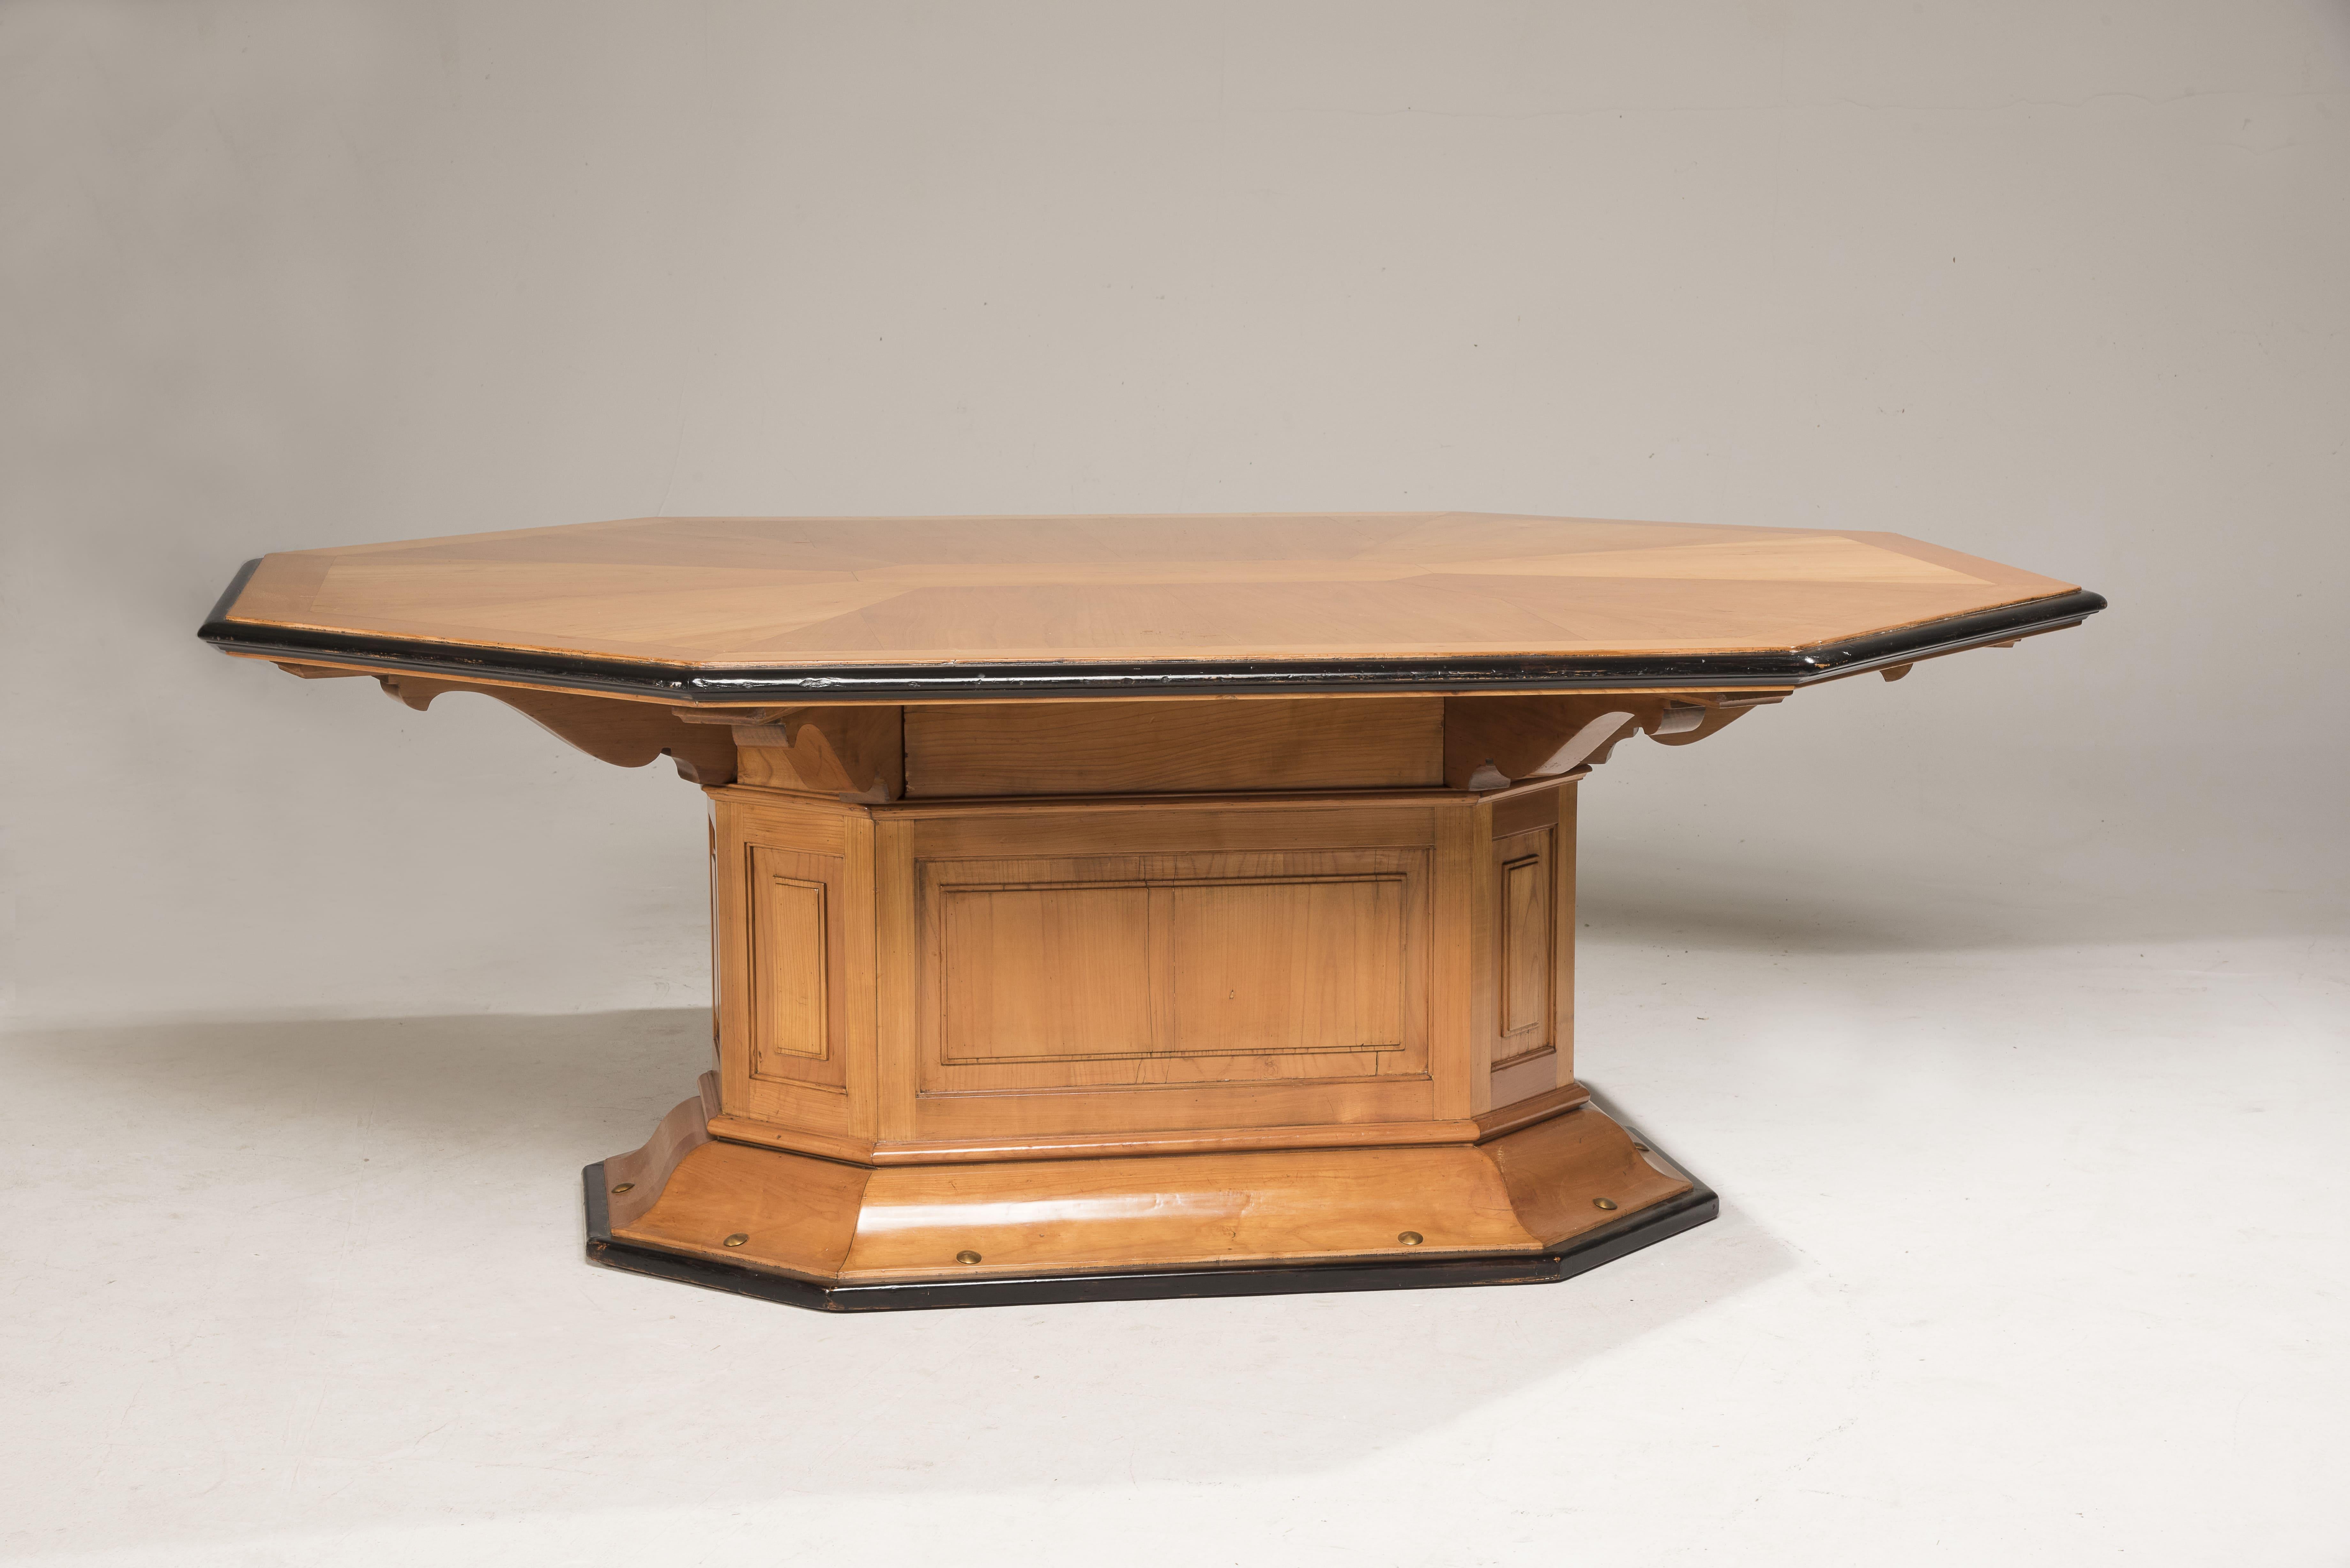 Art Deco Octagonal Cherrywood Table with Black Borders and Brass Details For Sale 1